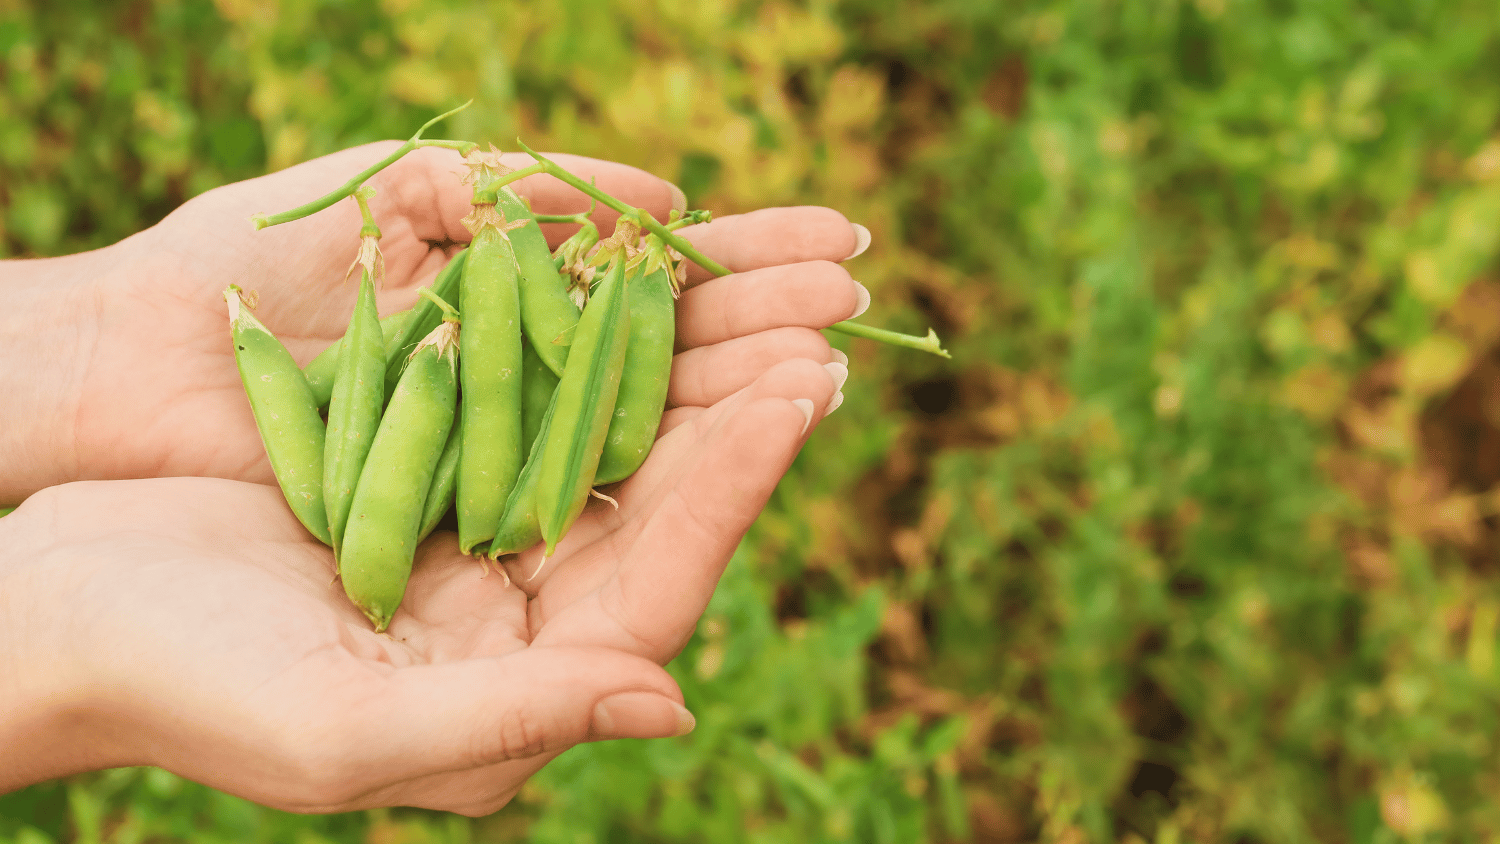 Peas being held by a hand over a field